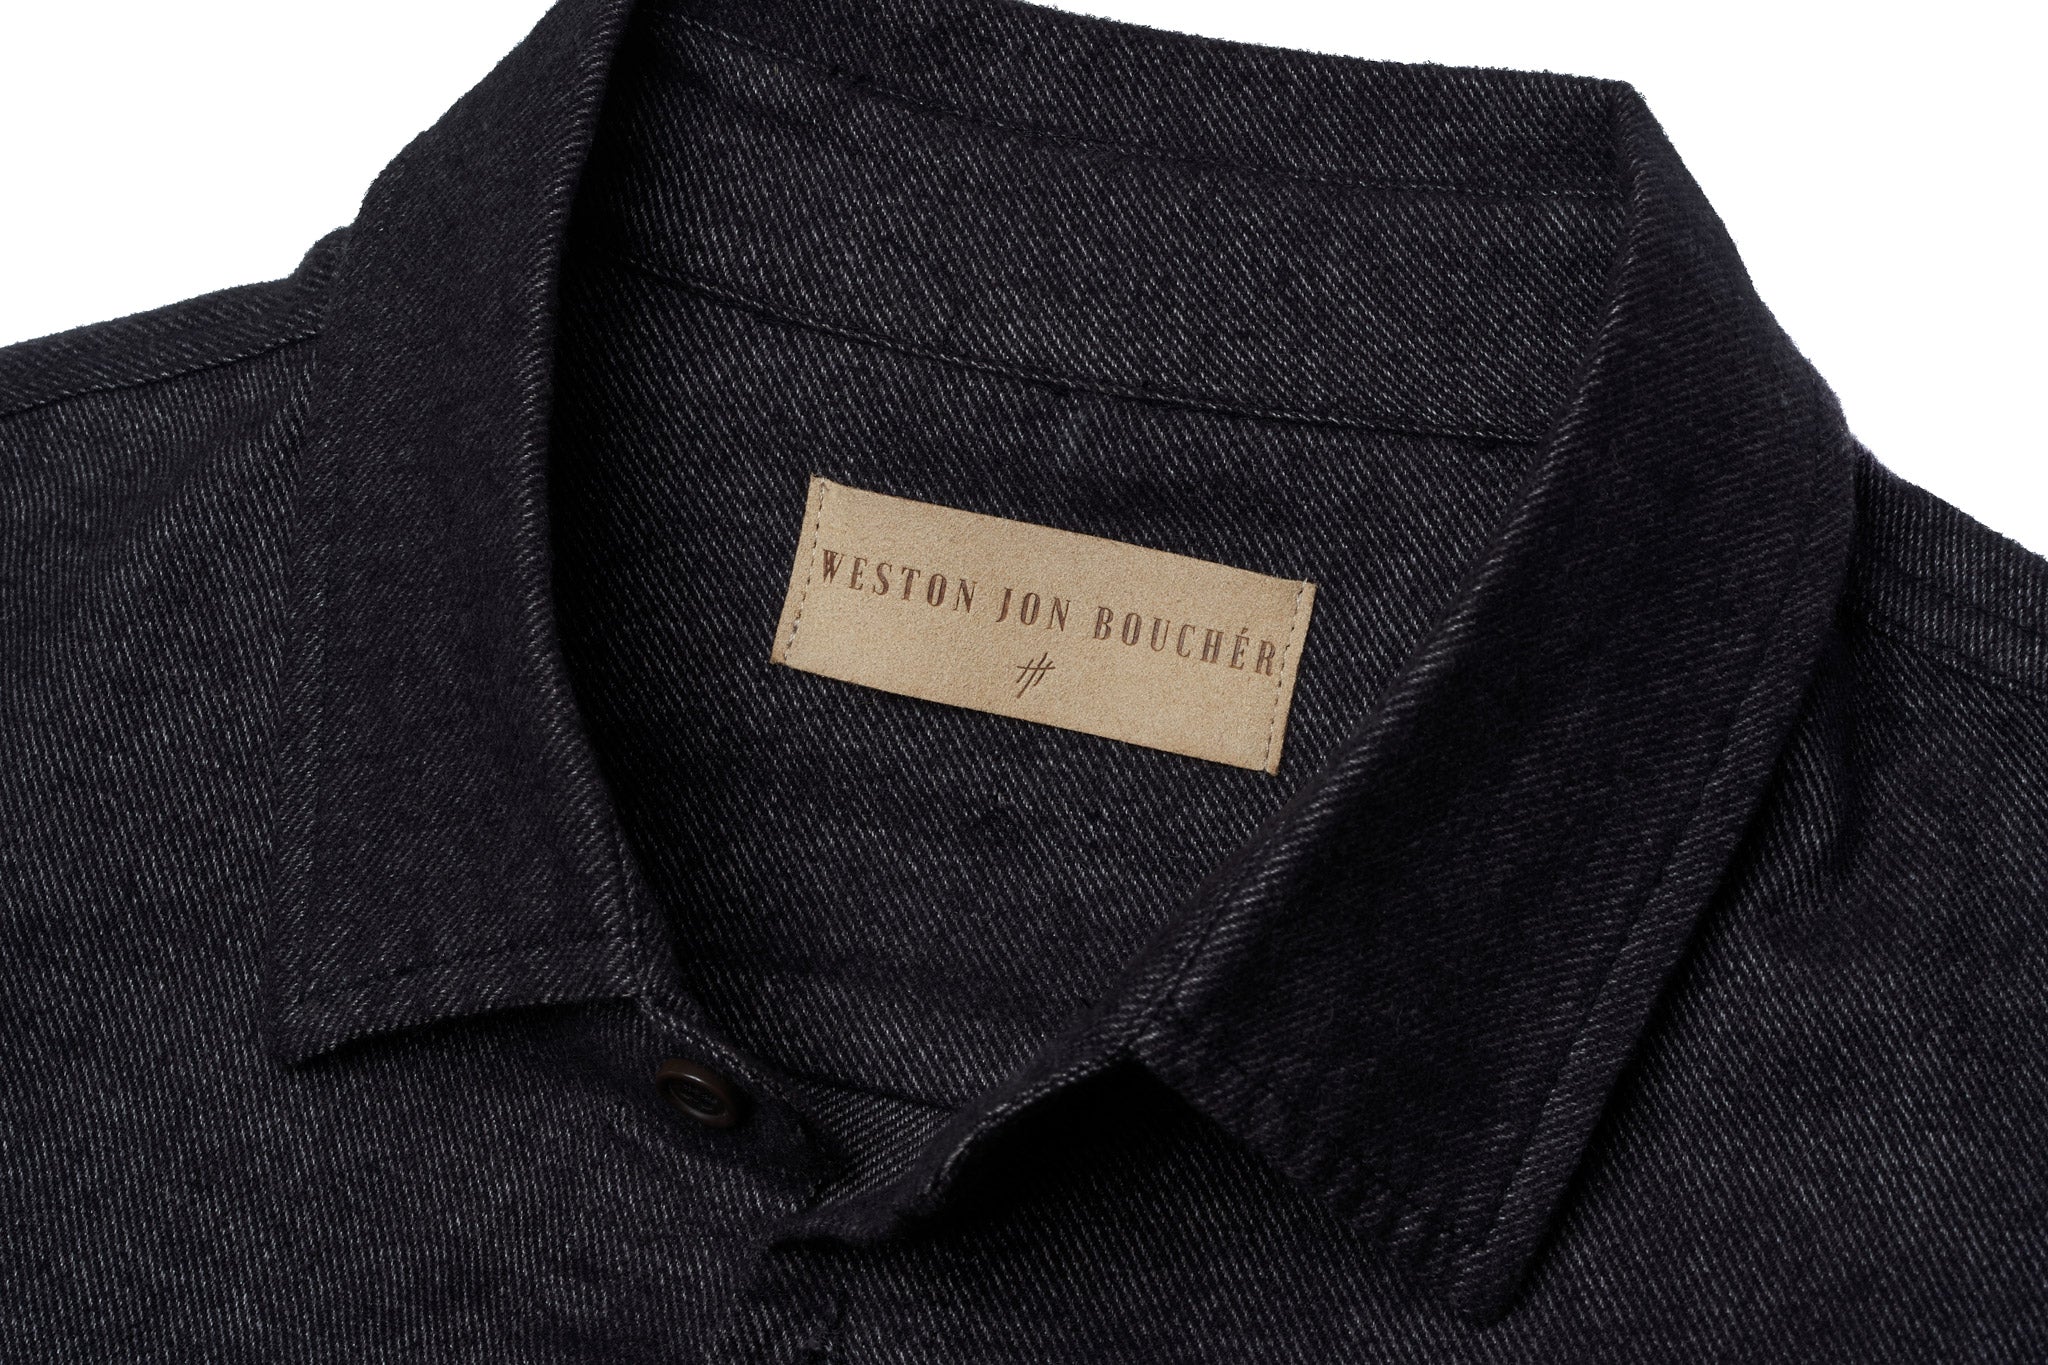 The Untucked Tailored SLIM Fit Button-Up Shirt by WESTON JON BOUCHÉR